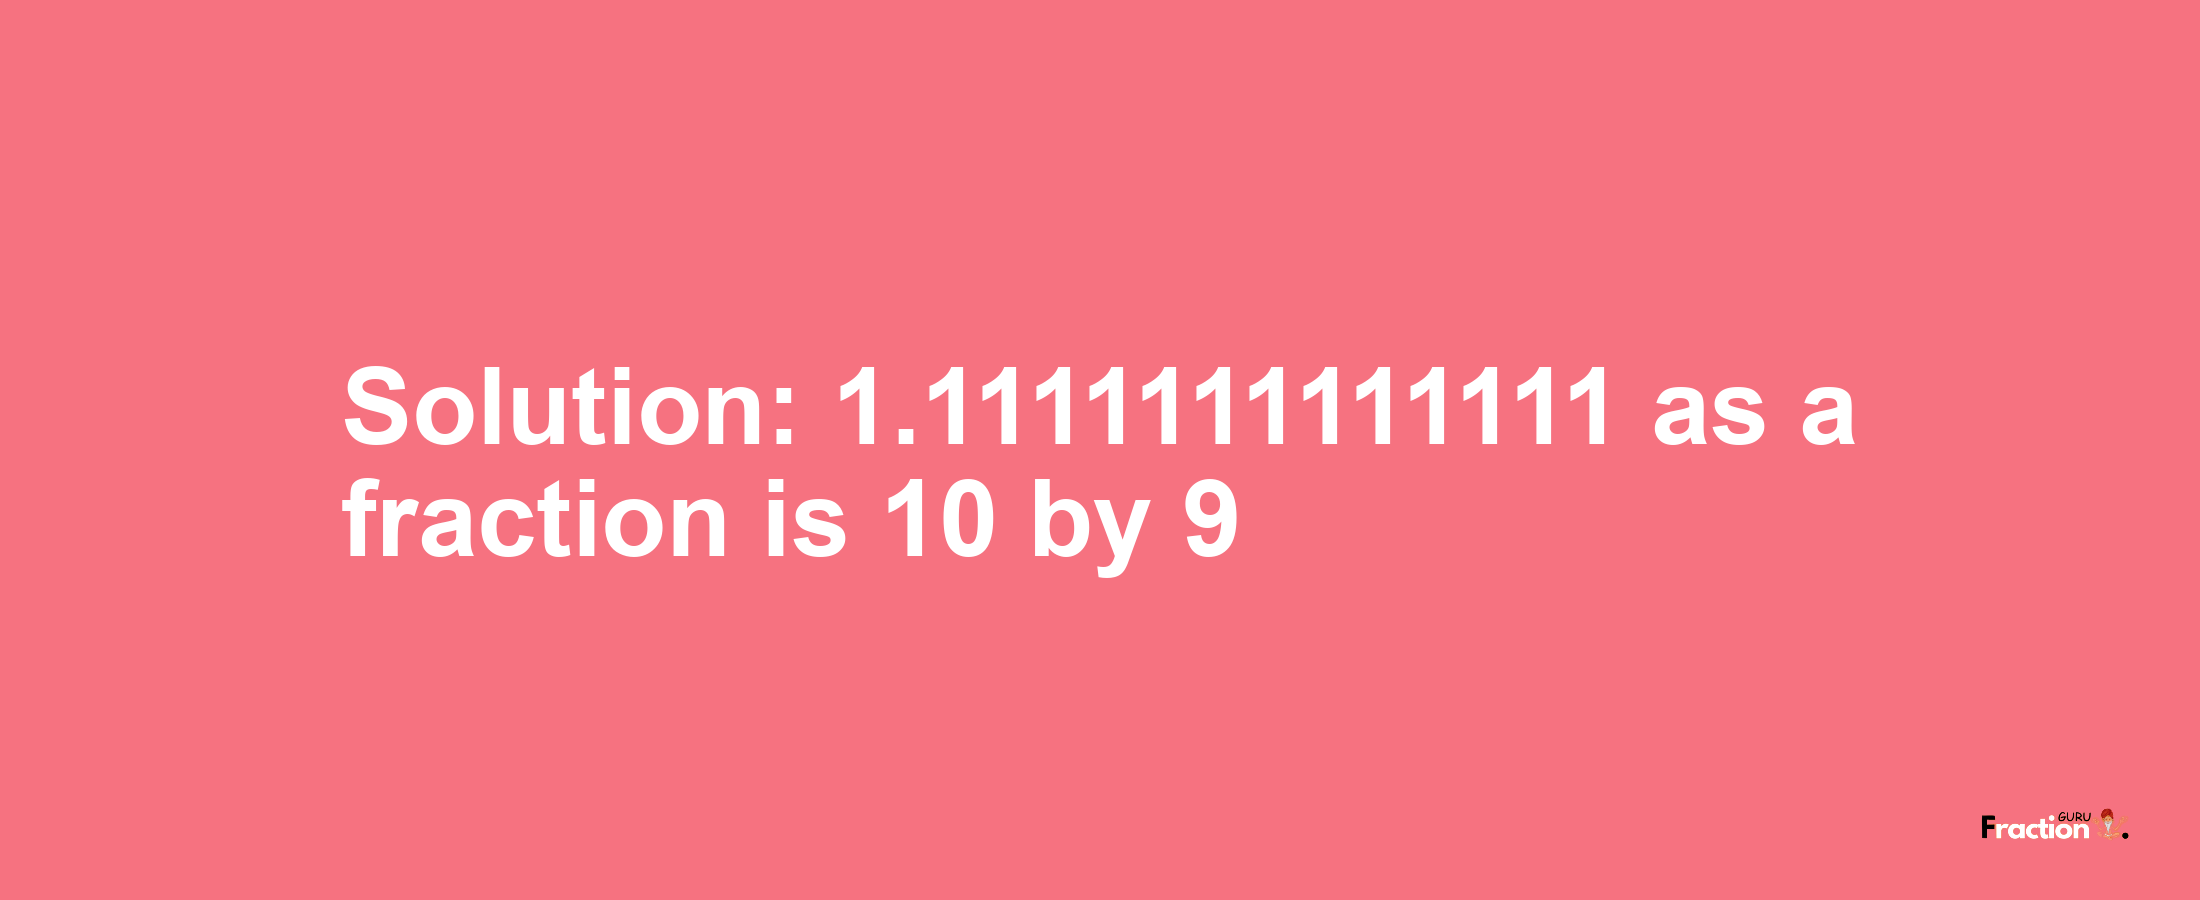 Solution:1.1111111111111 as a fraction is 10/9